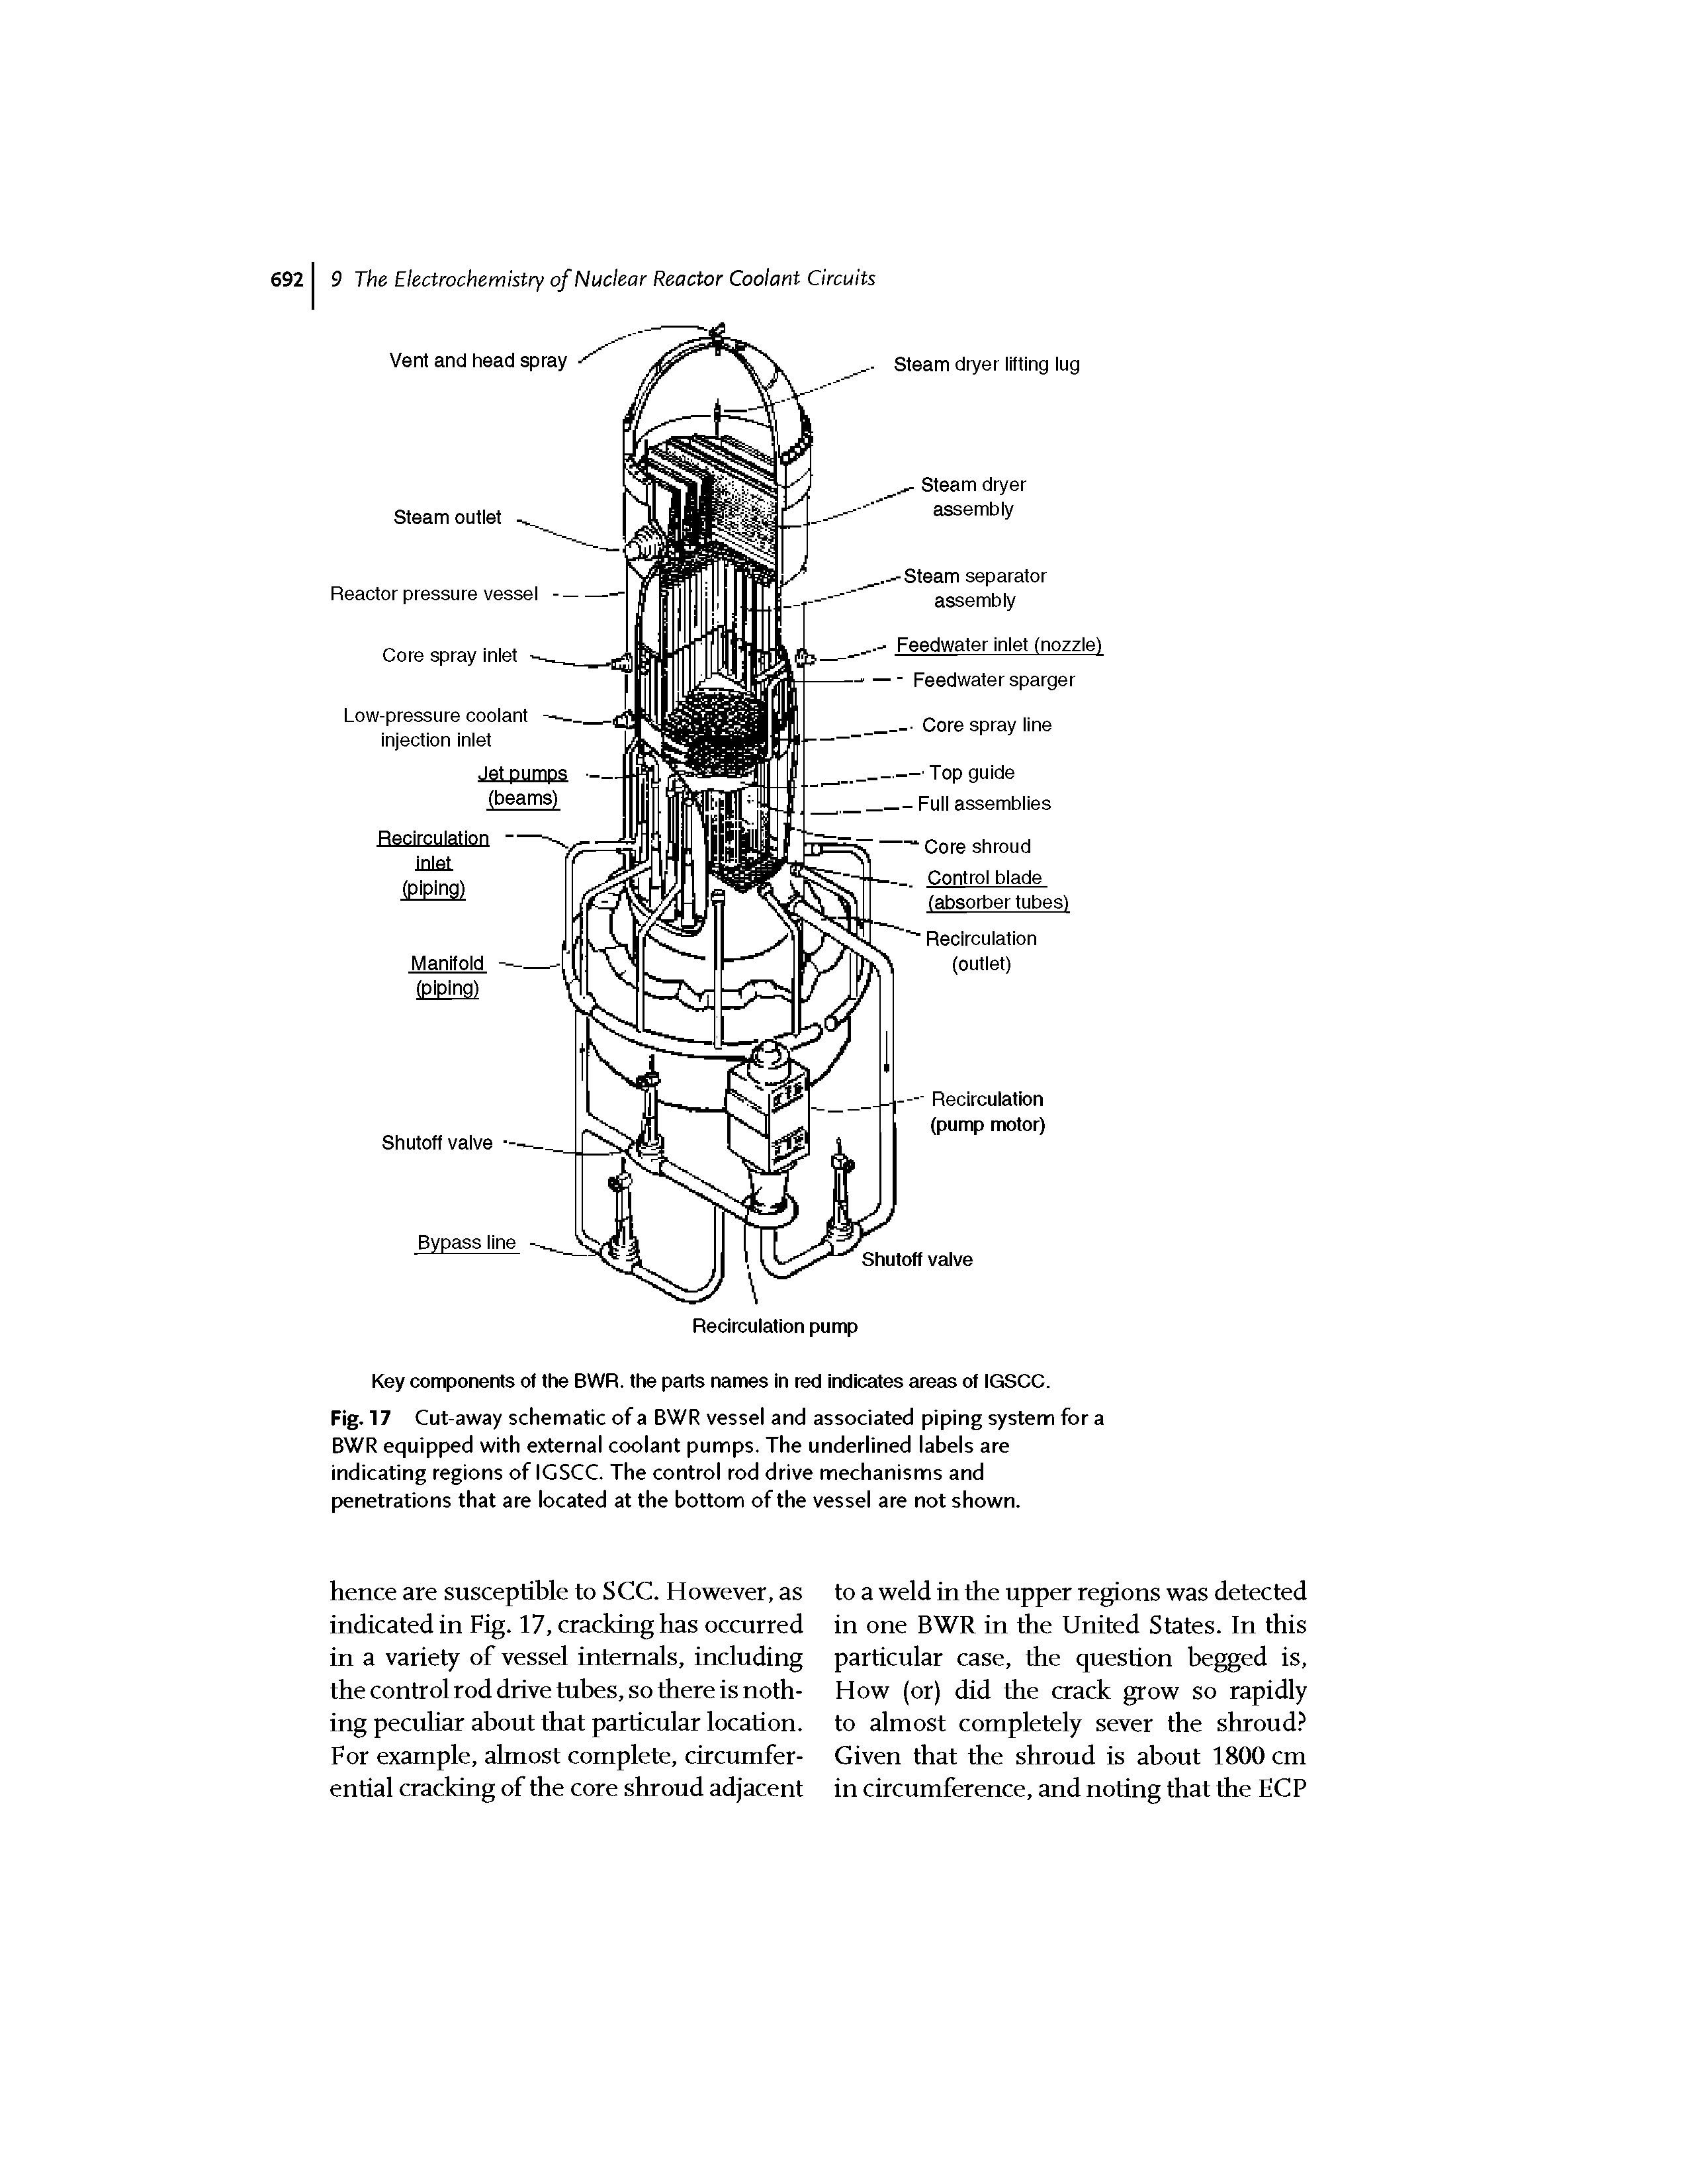 Fig. 17 Cut-away schematic of a BWR vessel and associated piping system for a BWR equipped with external coolant pumps. The underlined labels are indicating regions of IGSCC. The control rod drive mechanisms and penetrations that are located at the bottom of the vessel are not shown.